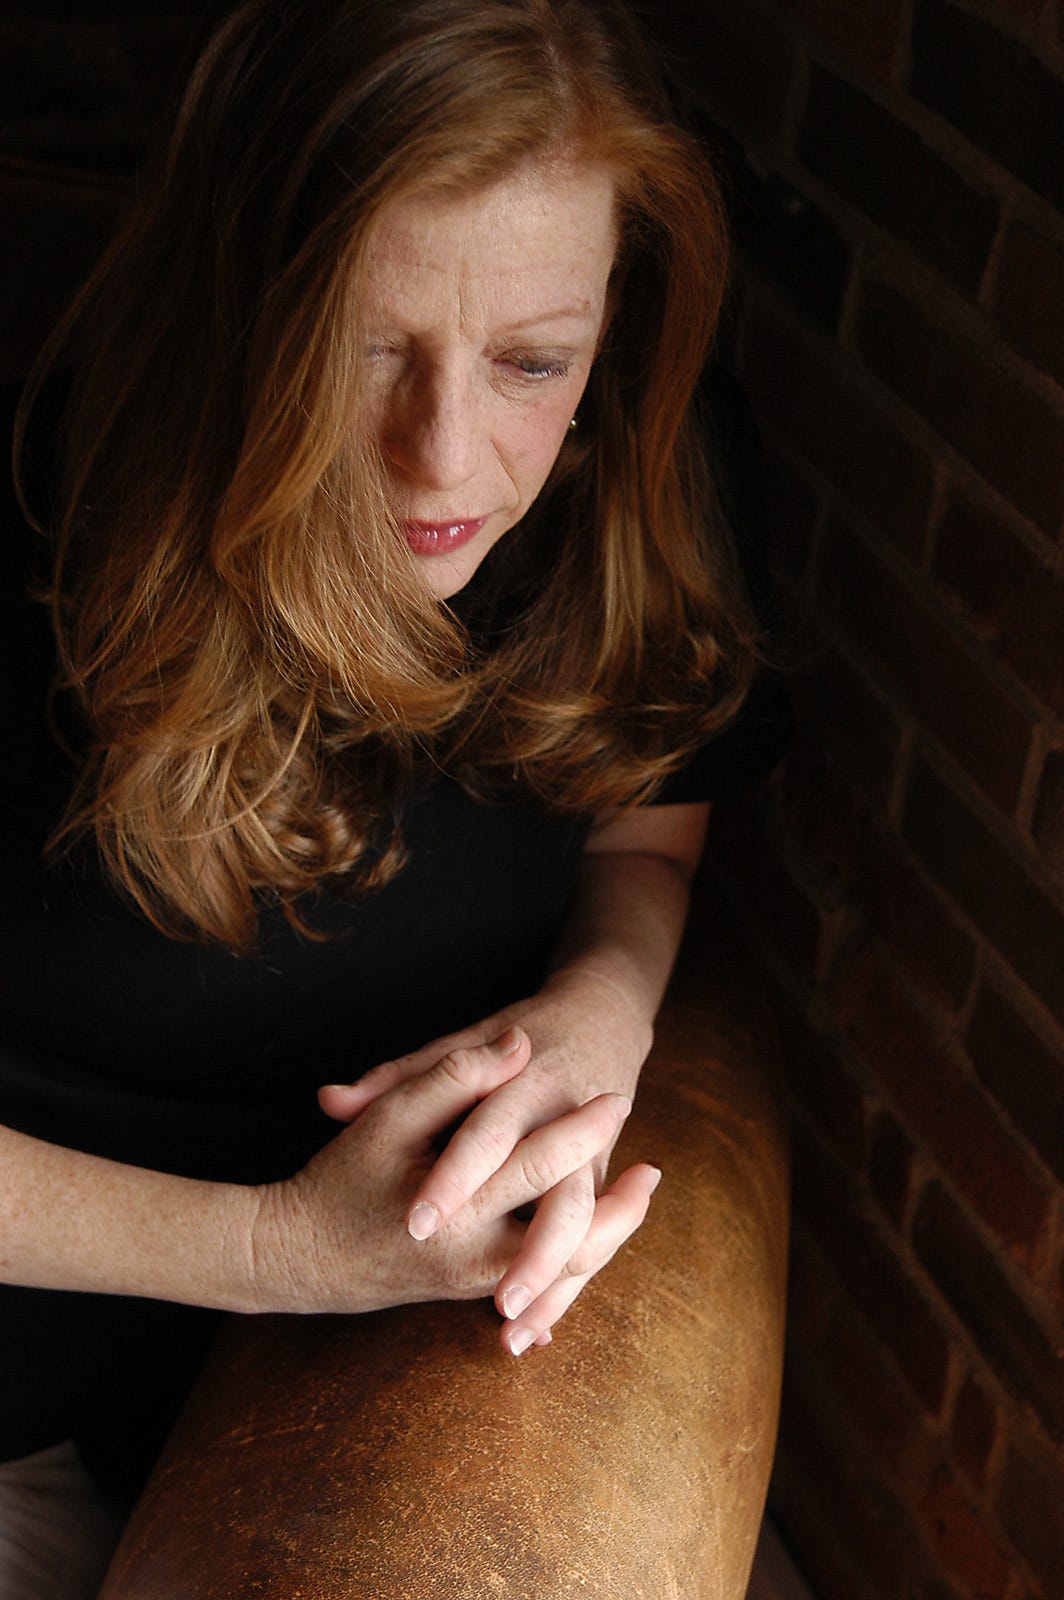 Susan Orlean portrait, her eyes cast down, face partly obscured by her hair, hands folded on chair arm.